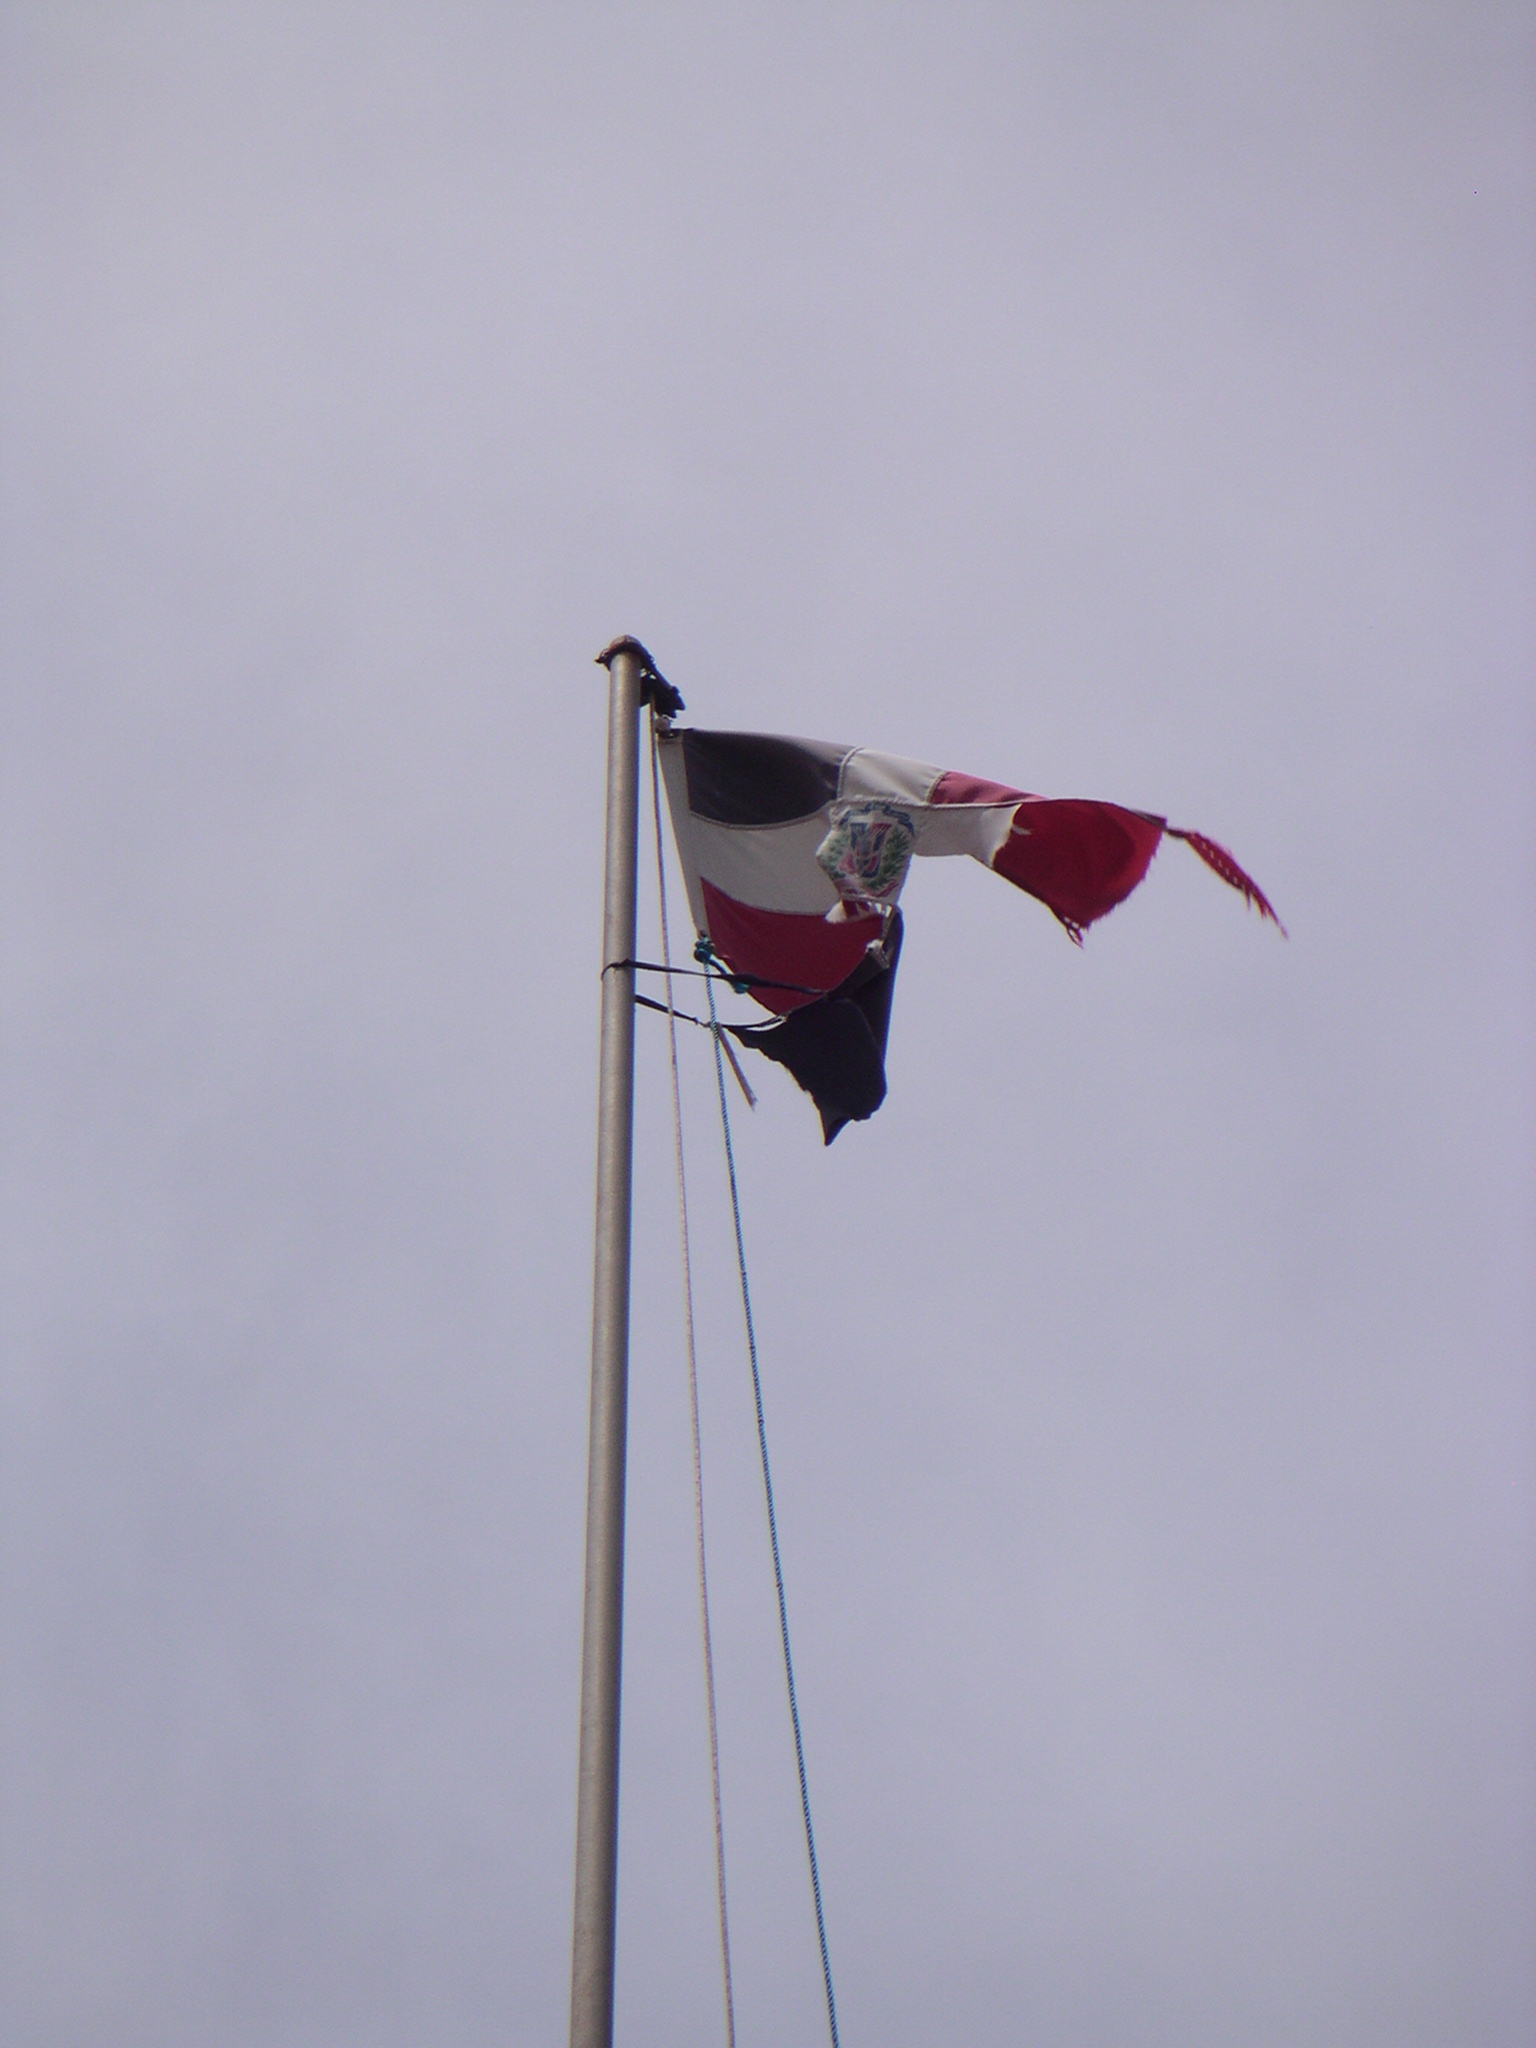 a flag flies high in the air with another flag blowing behind it